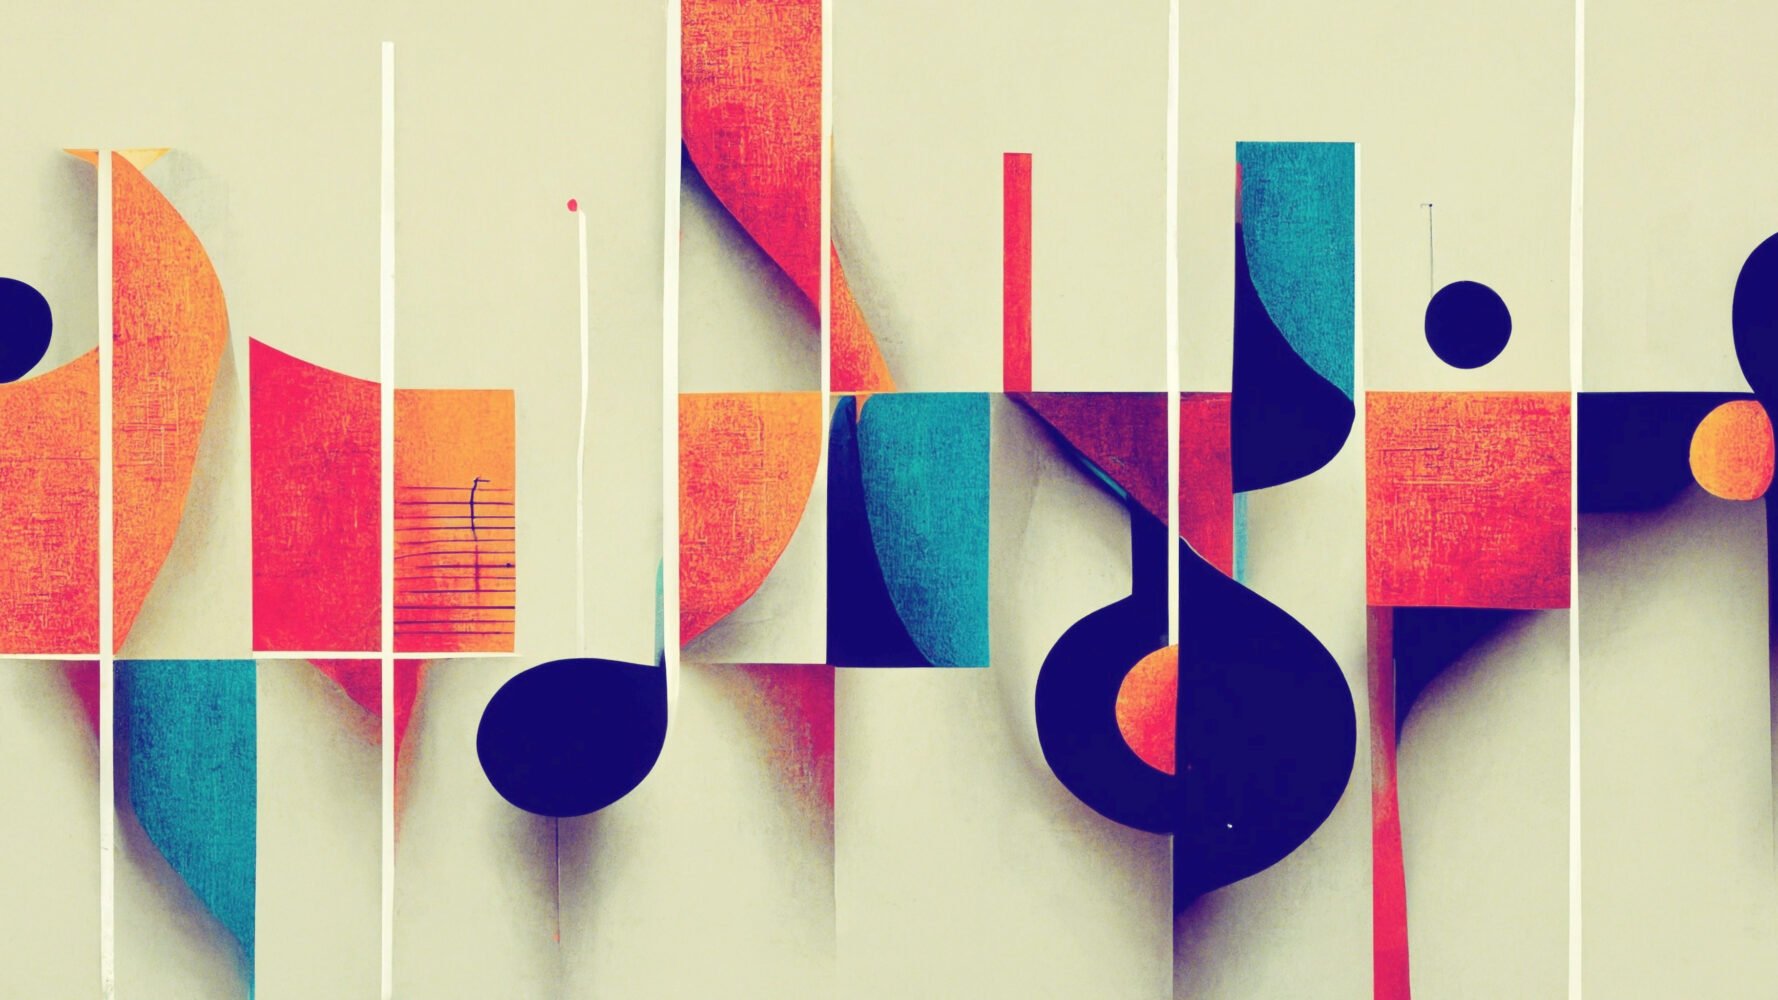 vivid abstract art showing music notes and shapes